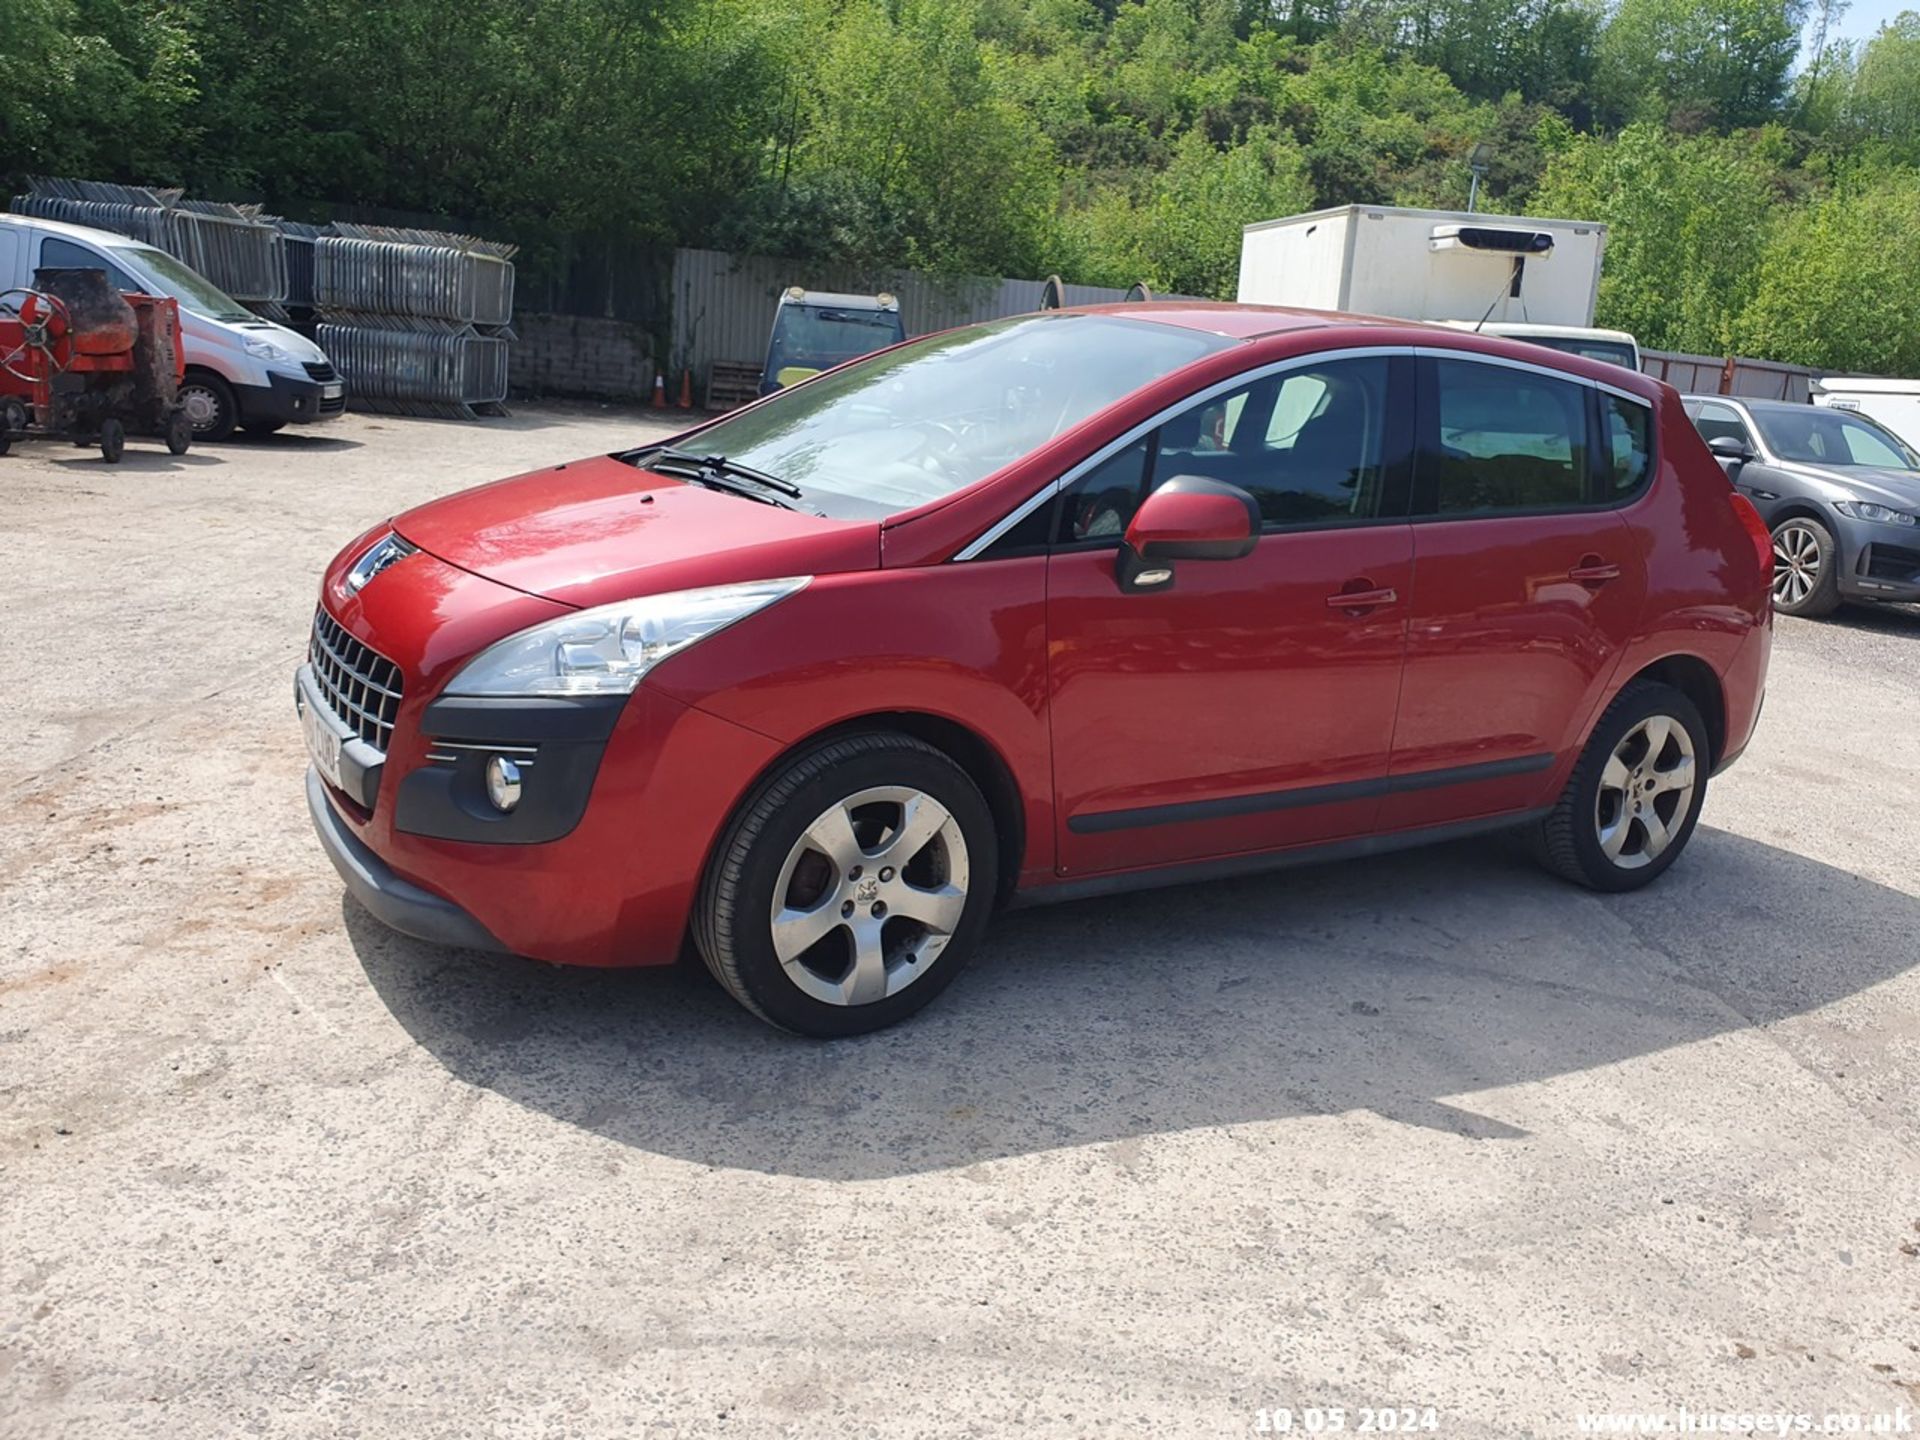 11/61 PEUGEOT 3008 SPORT E-HDI S-A - 1560cc 5dr Hatchback (Red, 89k) - Image 21 of 49